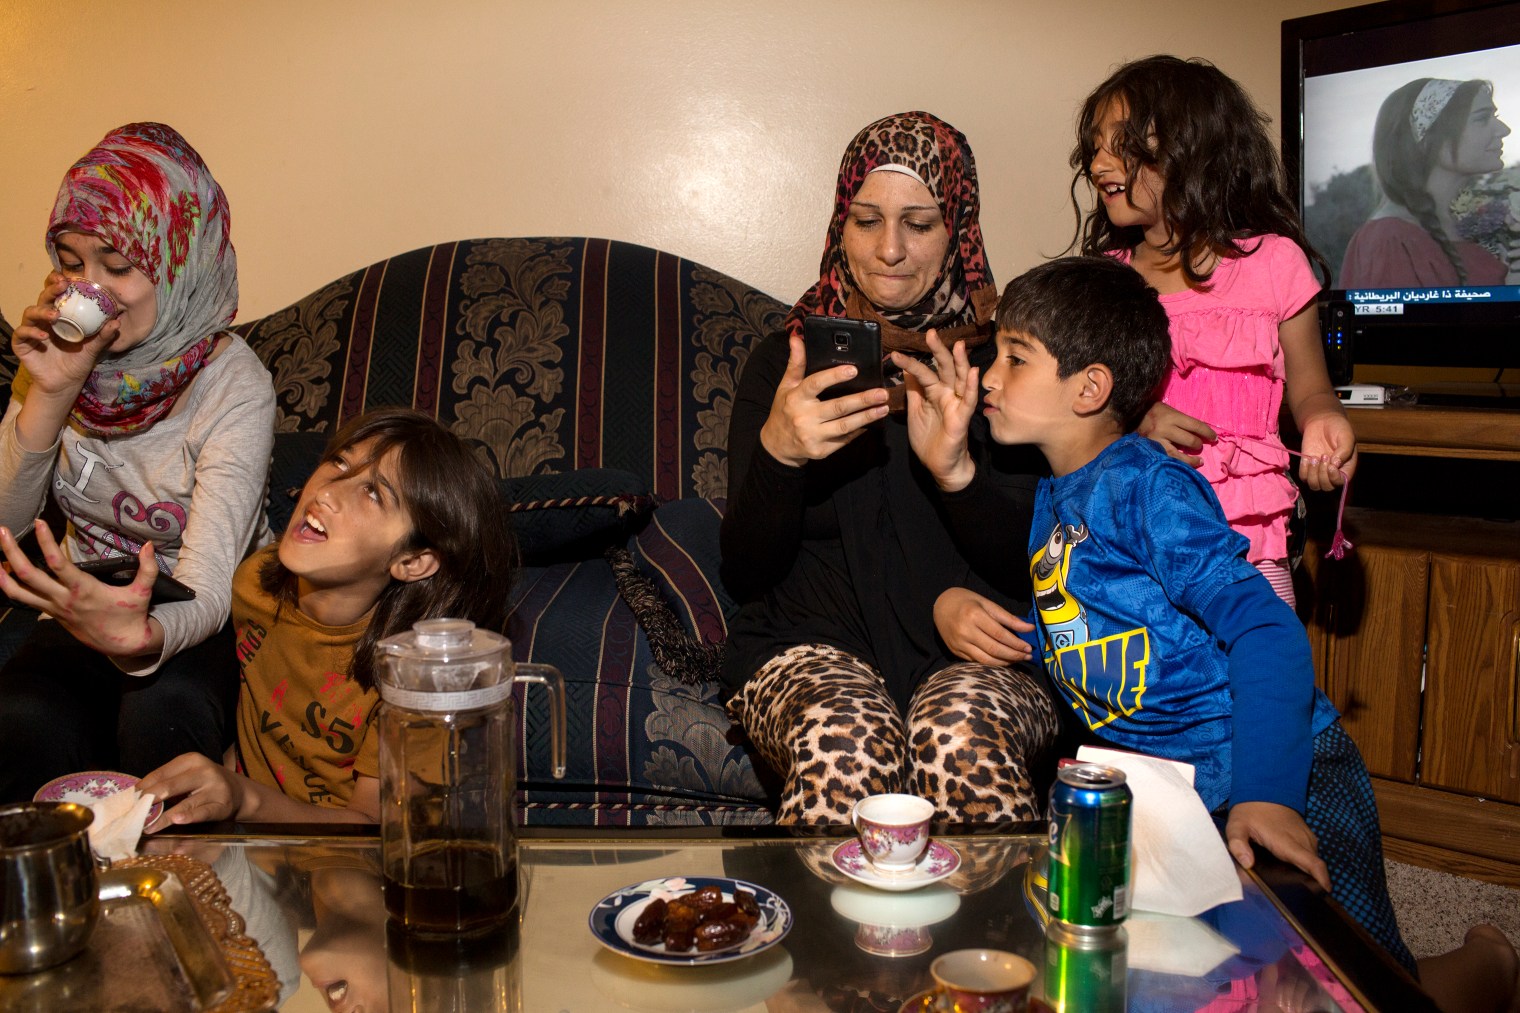 Ghazweh Aljabooli and her children, Sedra, Haidar, Mutaz and Hala (left to right) after breaking their fast during Ramadan at their apartment in West Des Moines, Iowa.